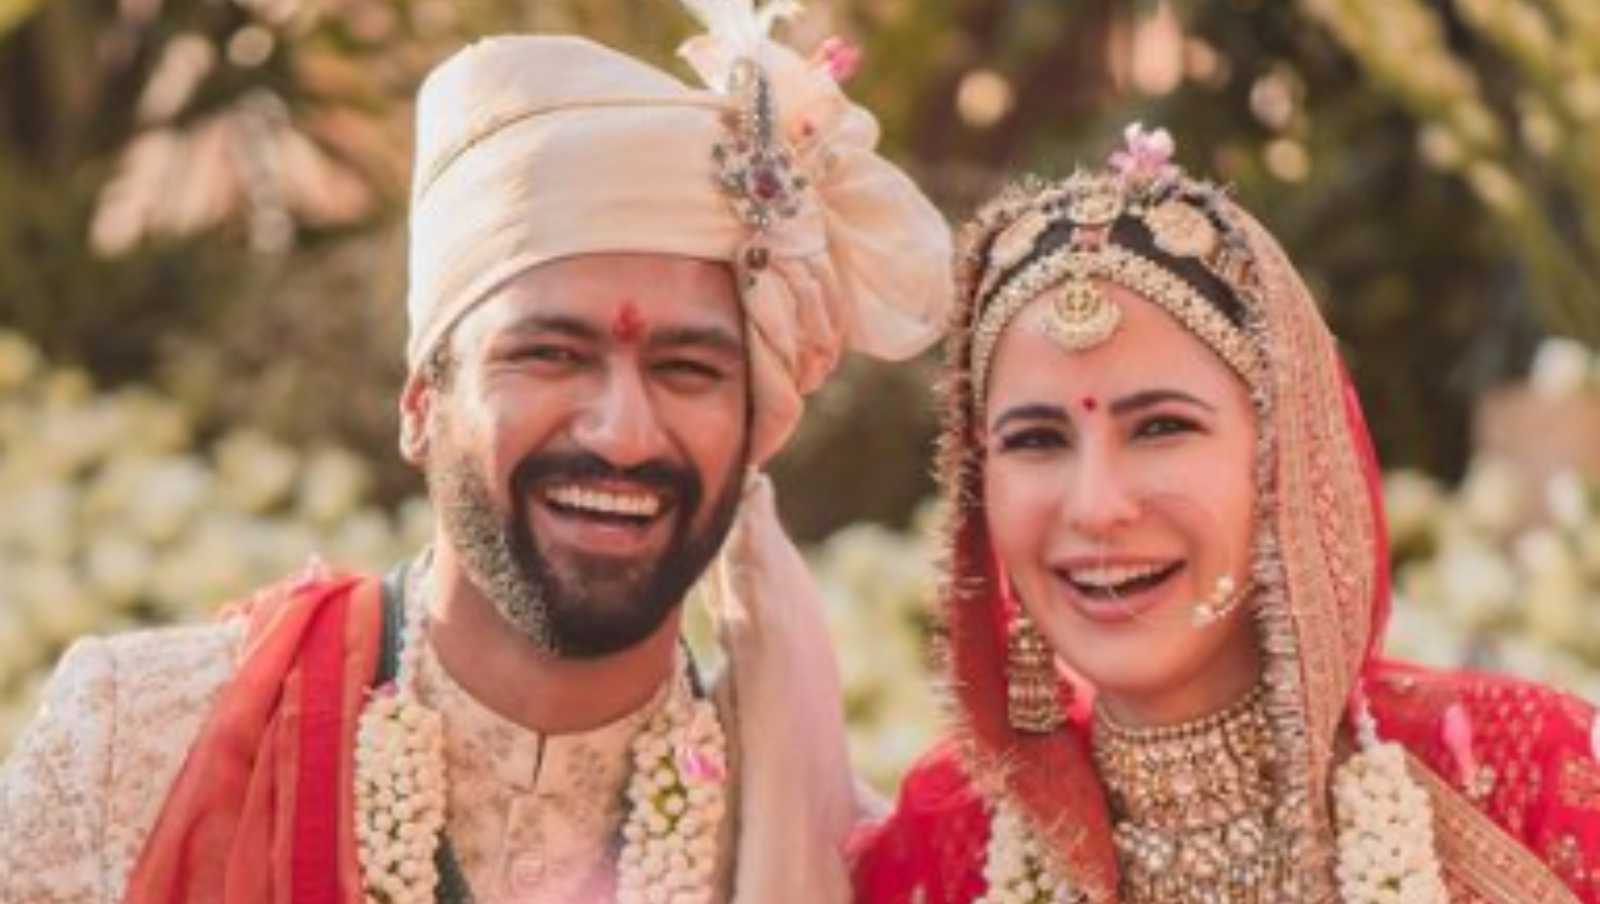 From unseen wedding pictures to an intimate holiday, Katrina Kaif & Vicky Kaushal give a glimpse of their magical married life on first anniversary